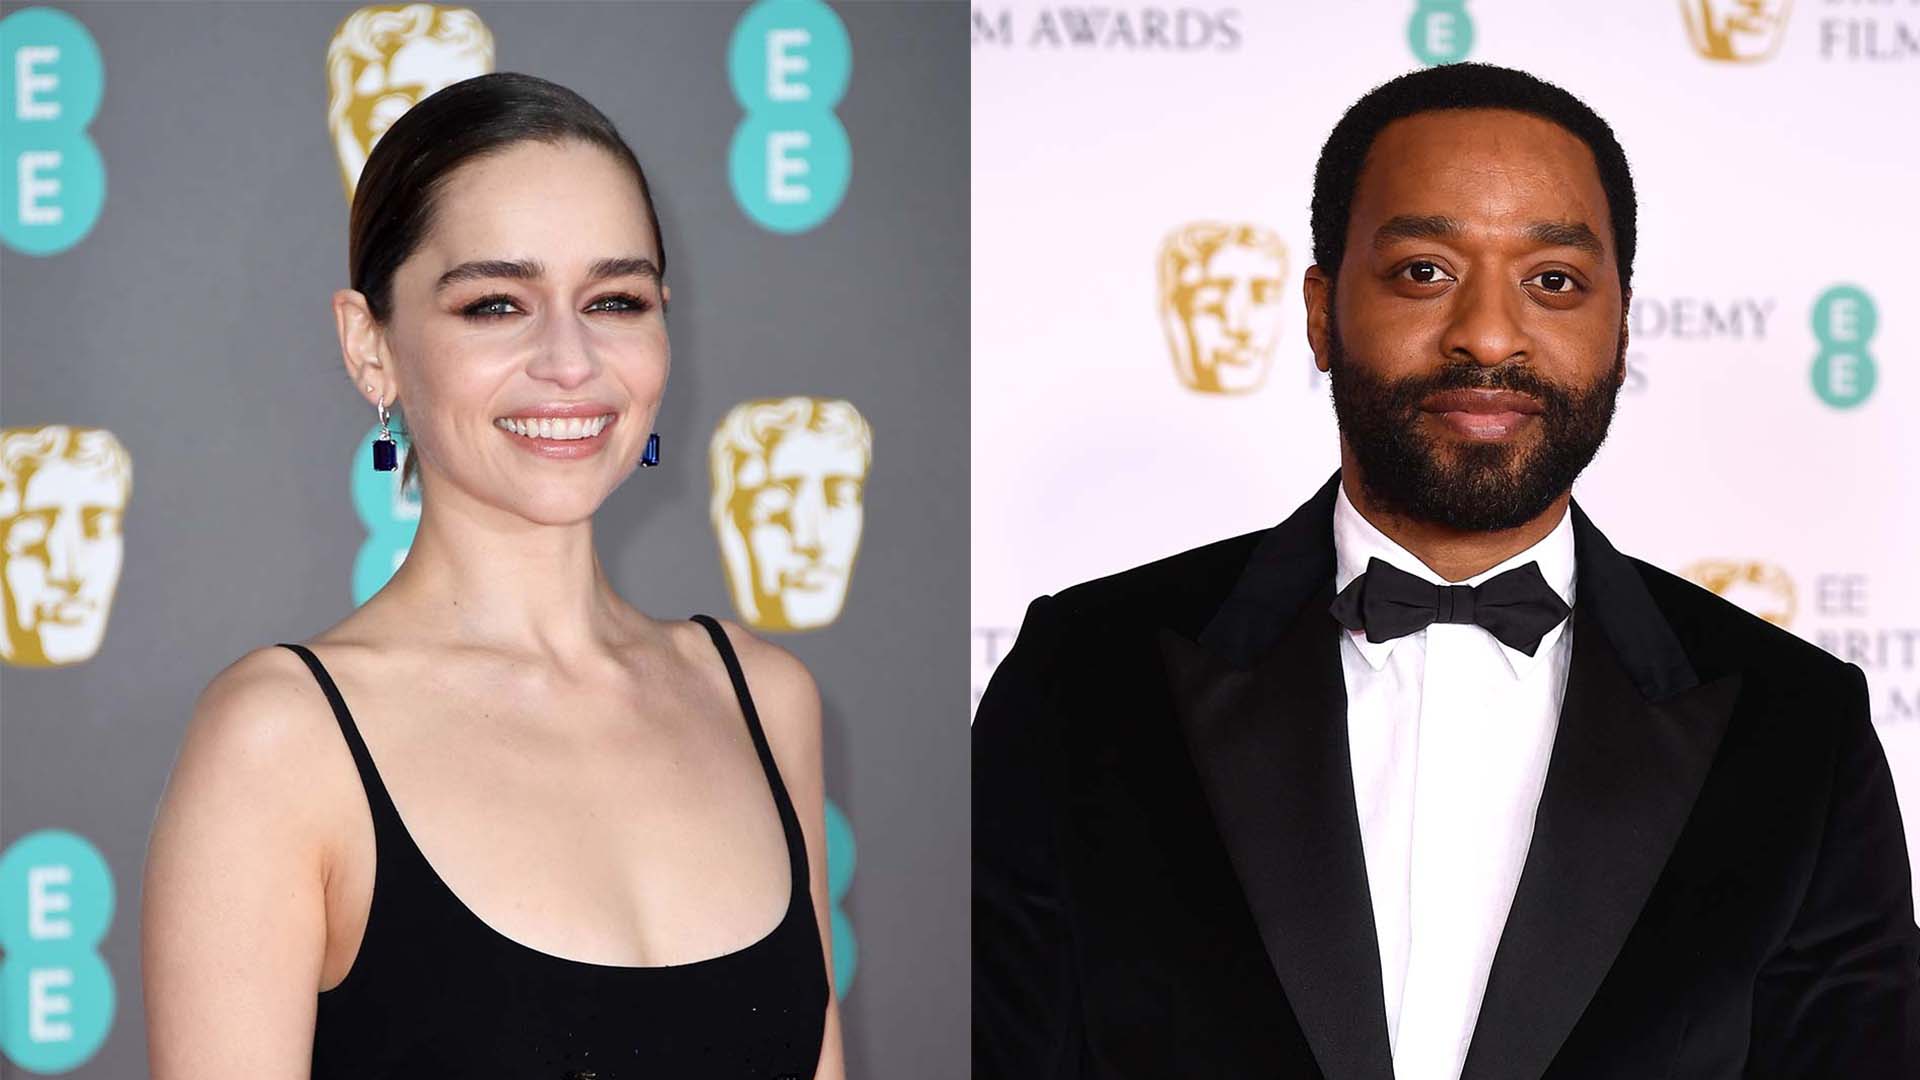 Emilia Clarke and Chiwetel Ejiofor Team Up for Sci-Fi Movie ‘The Pod Generation’